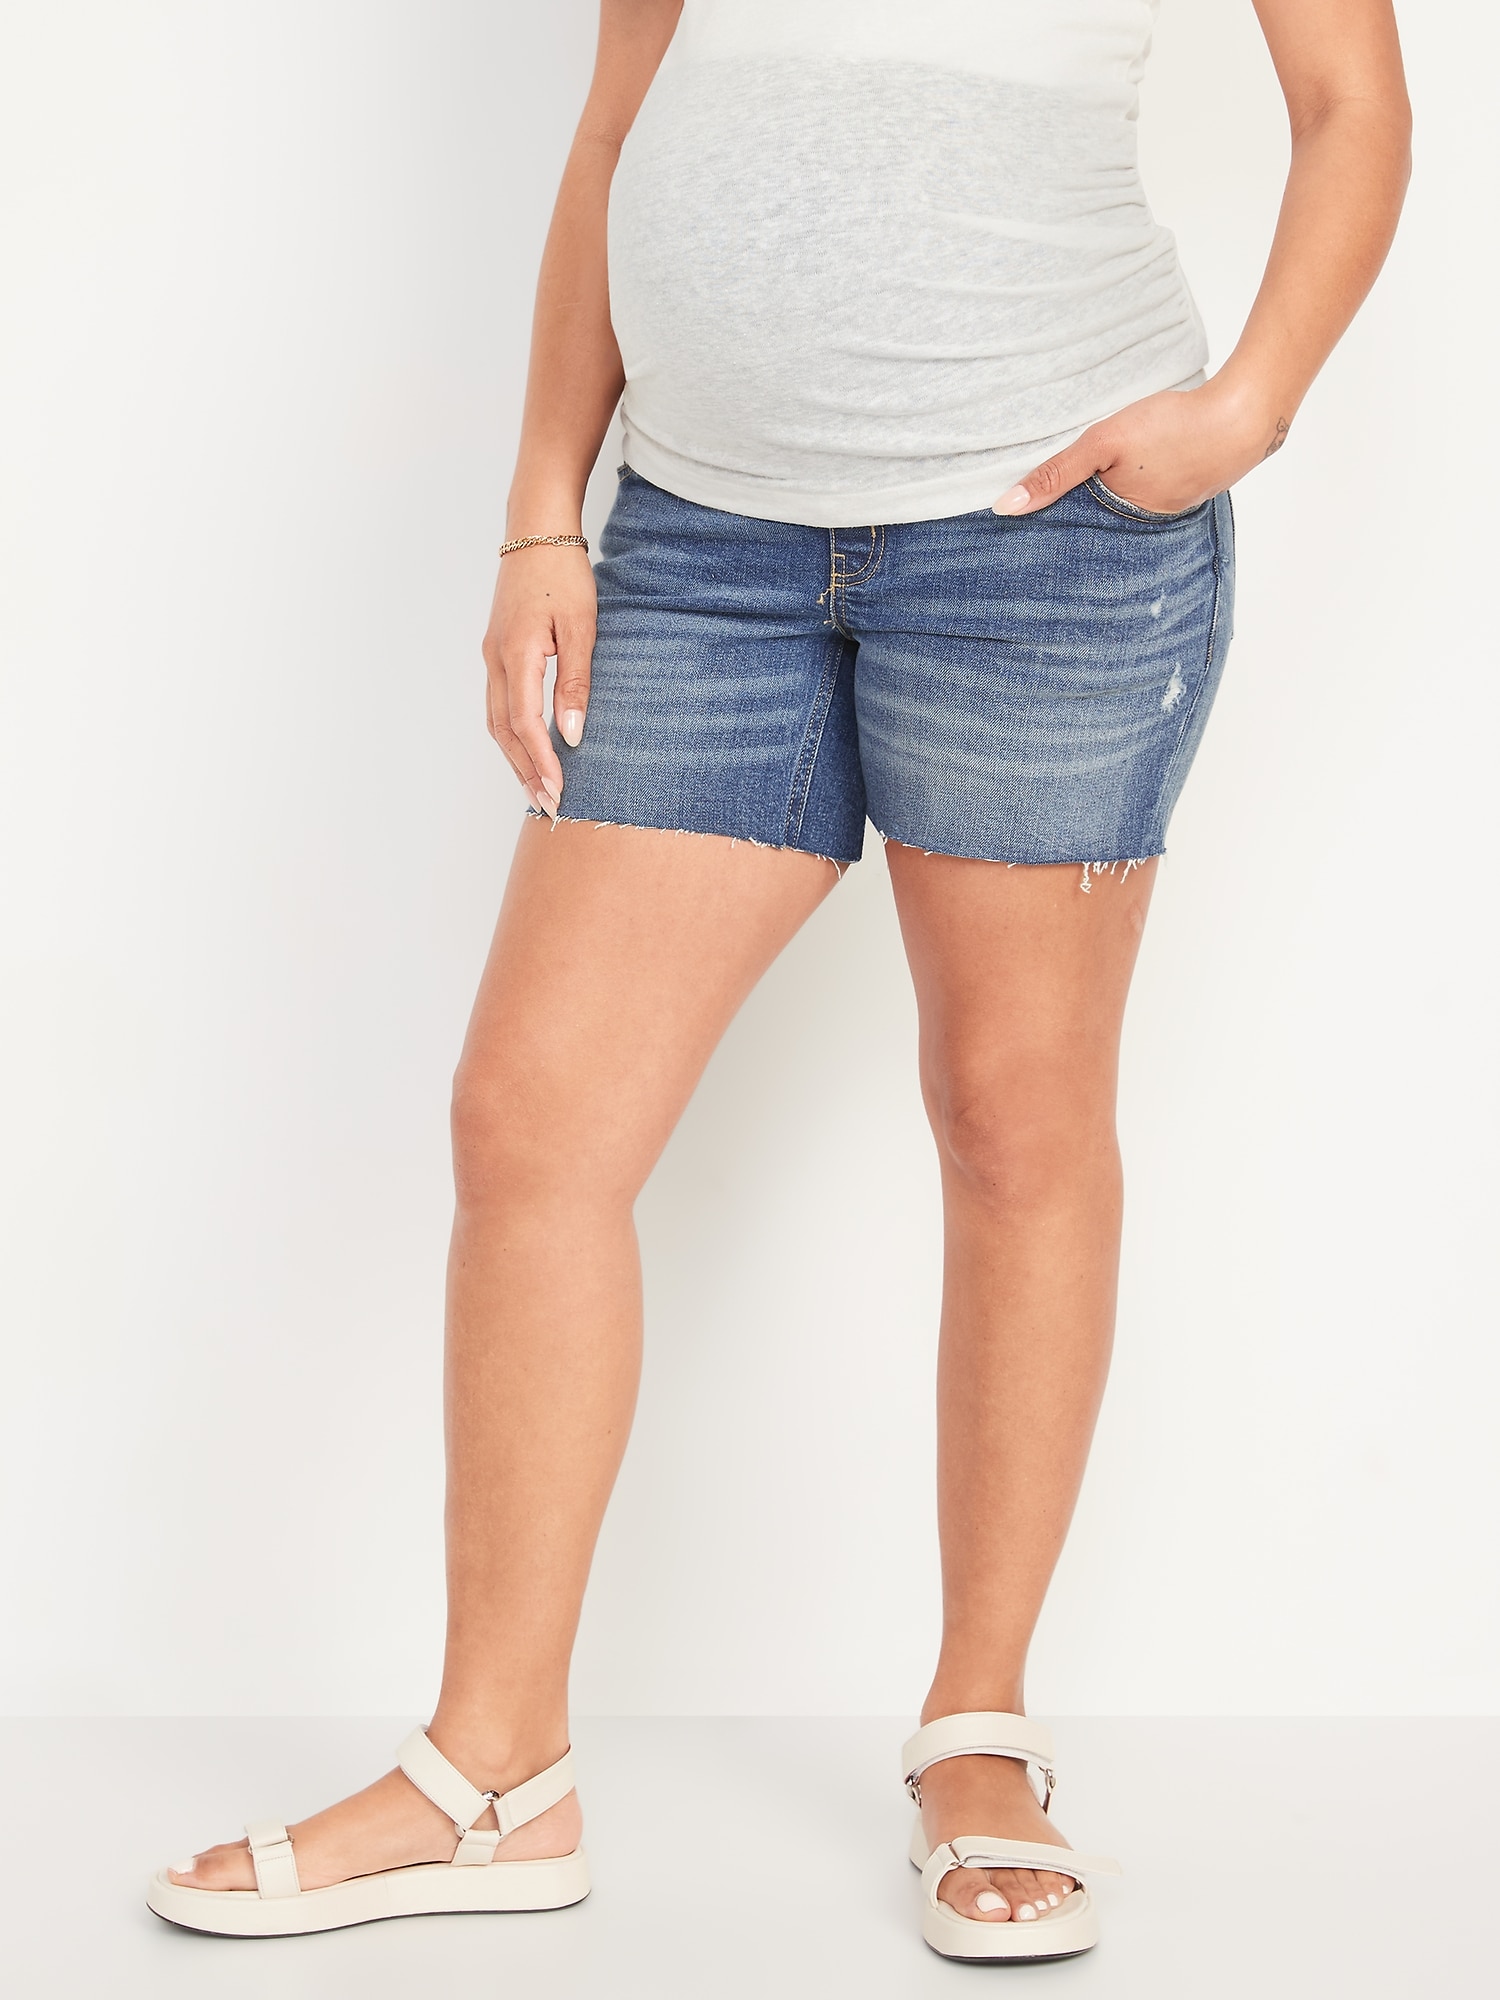 Old Navy Maternity Full Panel O.G. Straight Cut-Off Jean Shorts -- 5-inch inseam